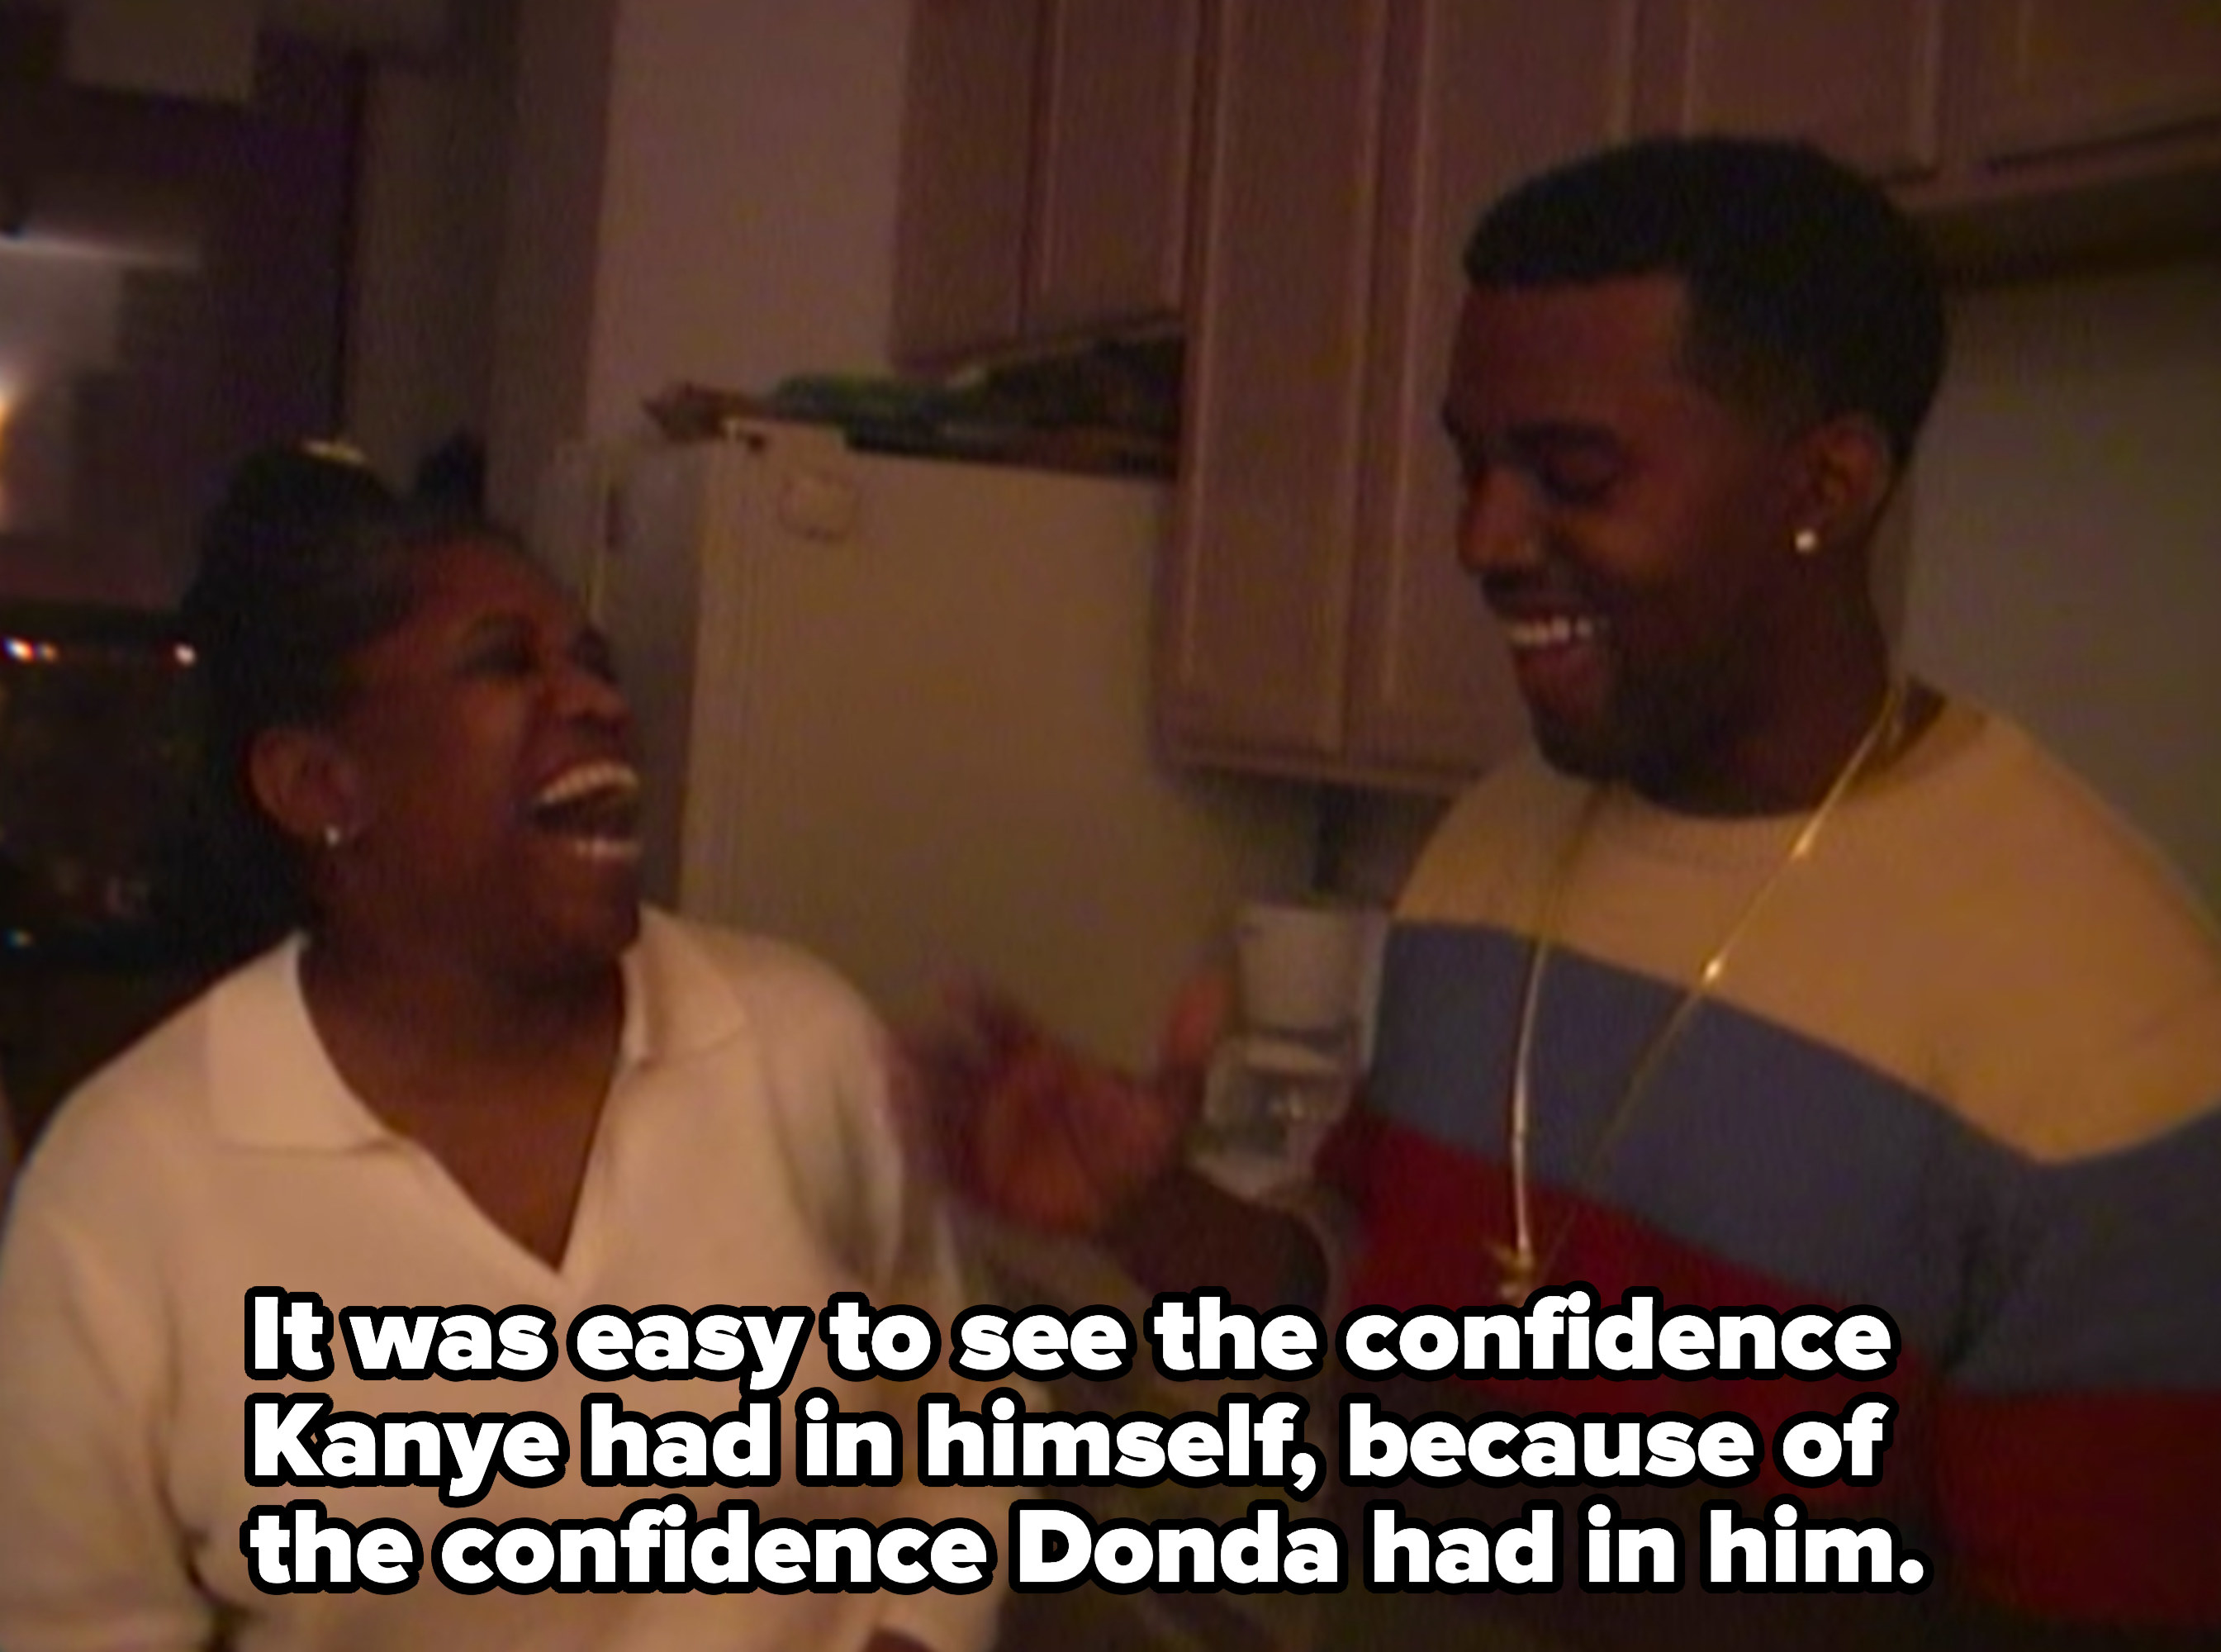 Mother and son laughing with the caption &quot;It was easy to see the confidence Kanye had in himself, because of the confidence Donda had in him&quot;